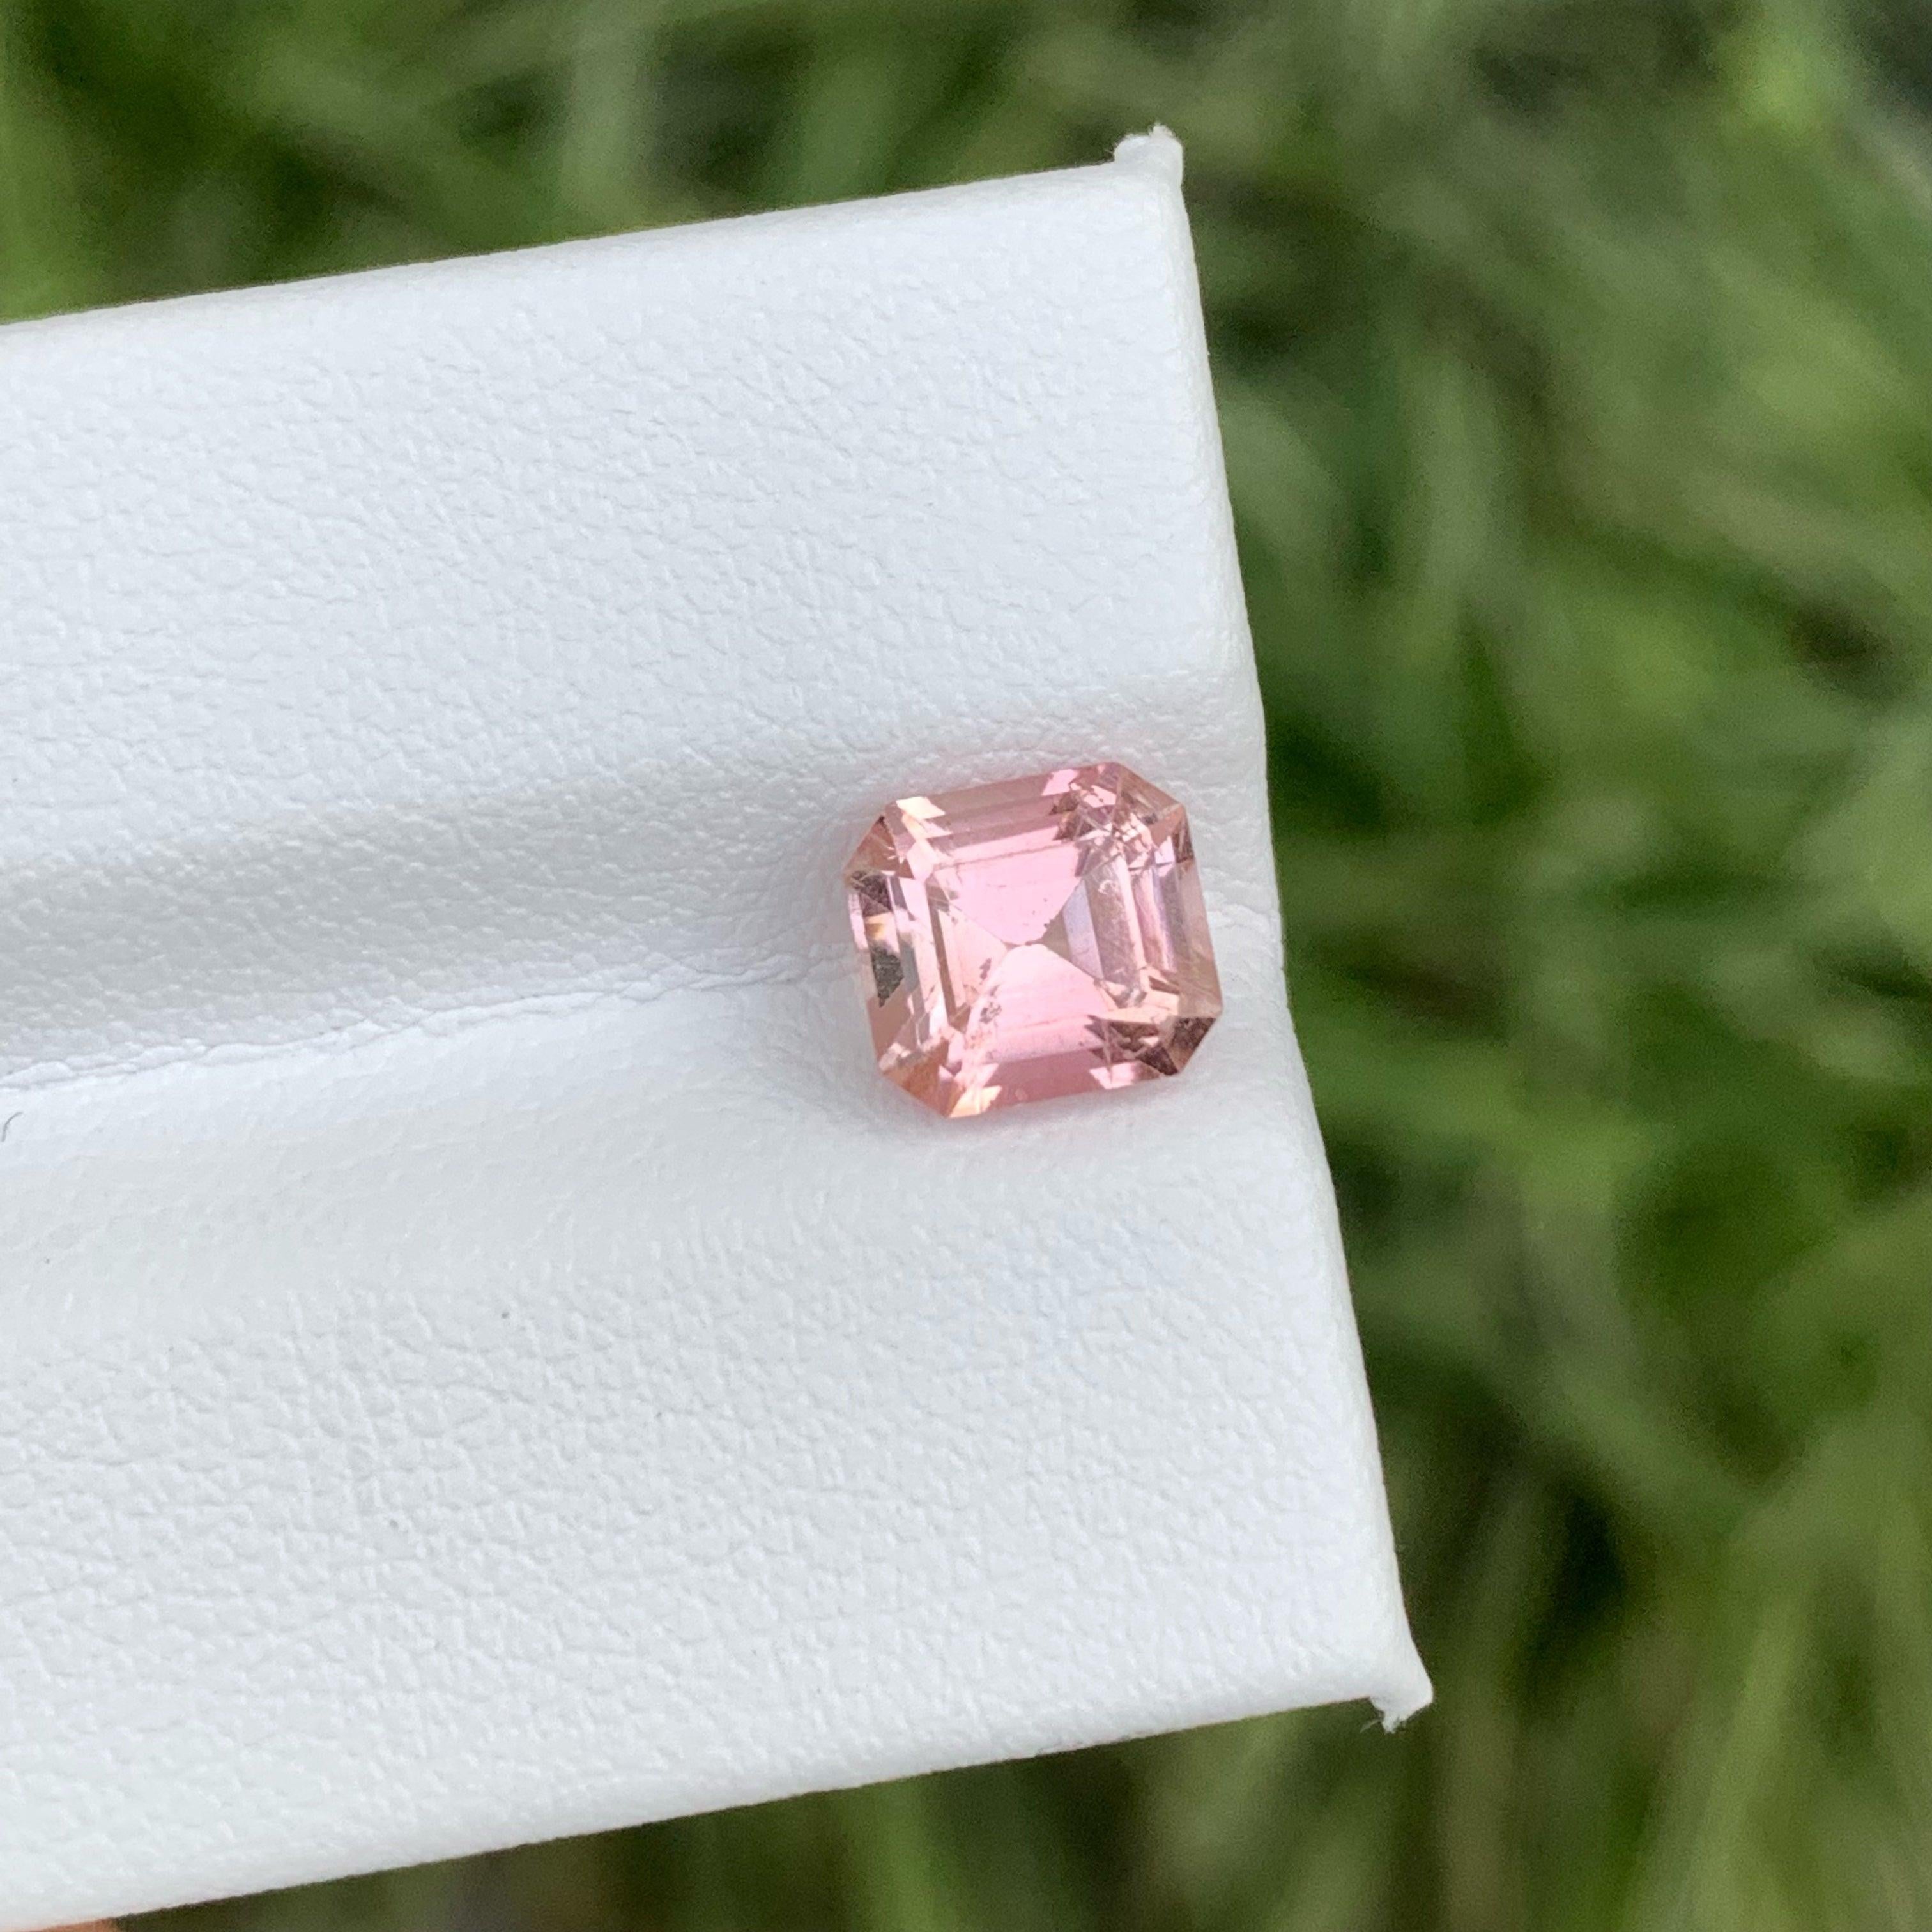 Lovely Baby Pink Tourmaline Stone of 2.05 carats from Afghanistan has a wonderful cut in a Octagon shape, incredible Pink Color. Great brilliance. This gem is VVS Clarity.

Product Information
GEMSTONE TYPE:	Lovely Baby Pink Tourmaline